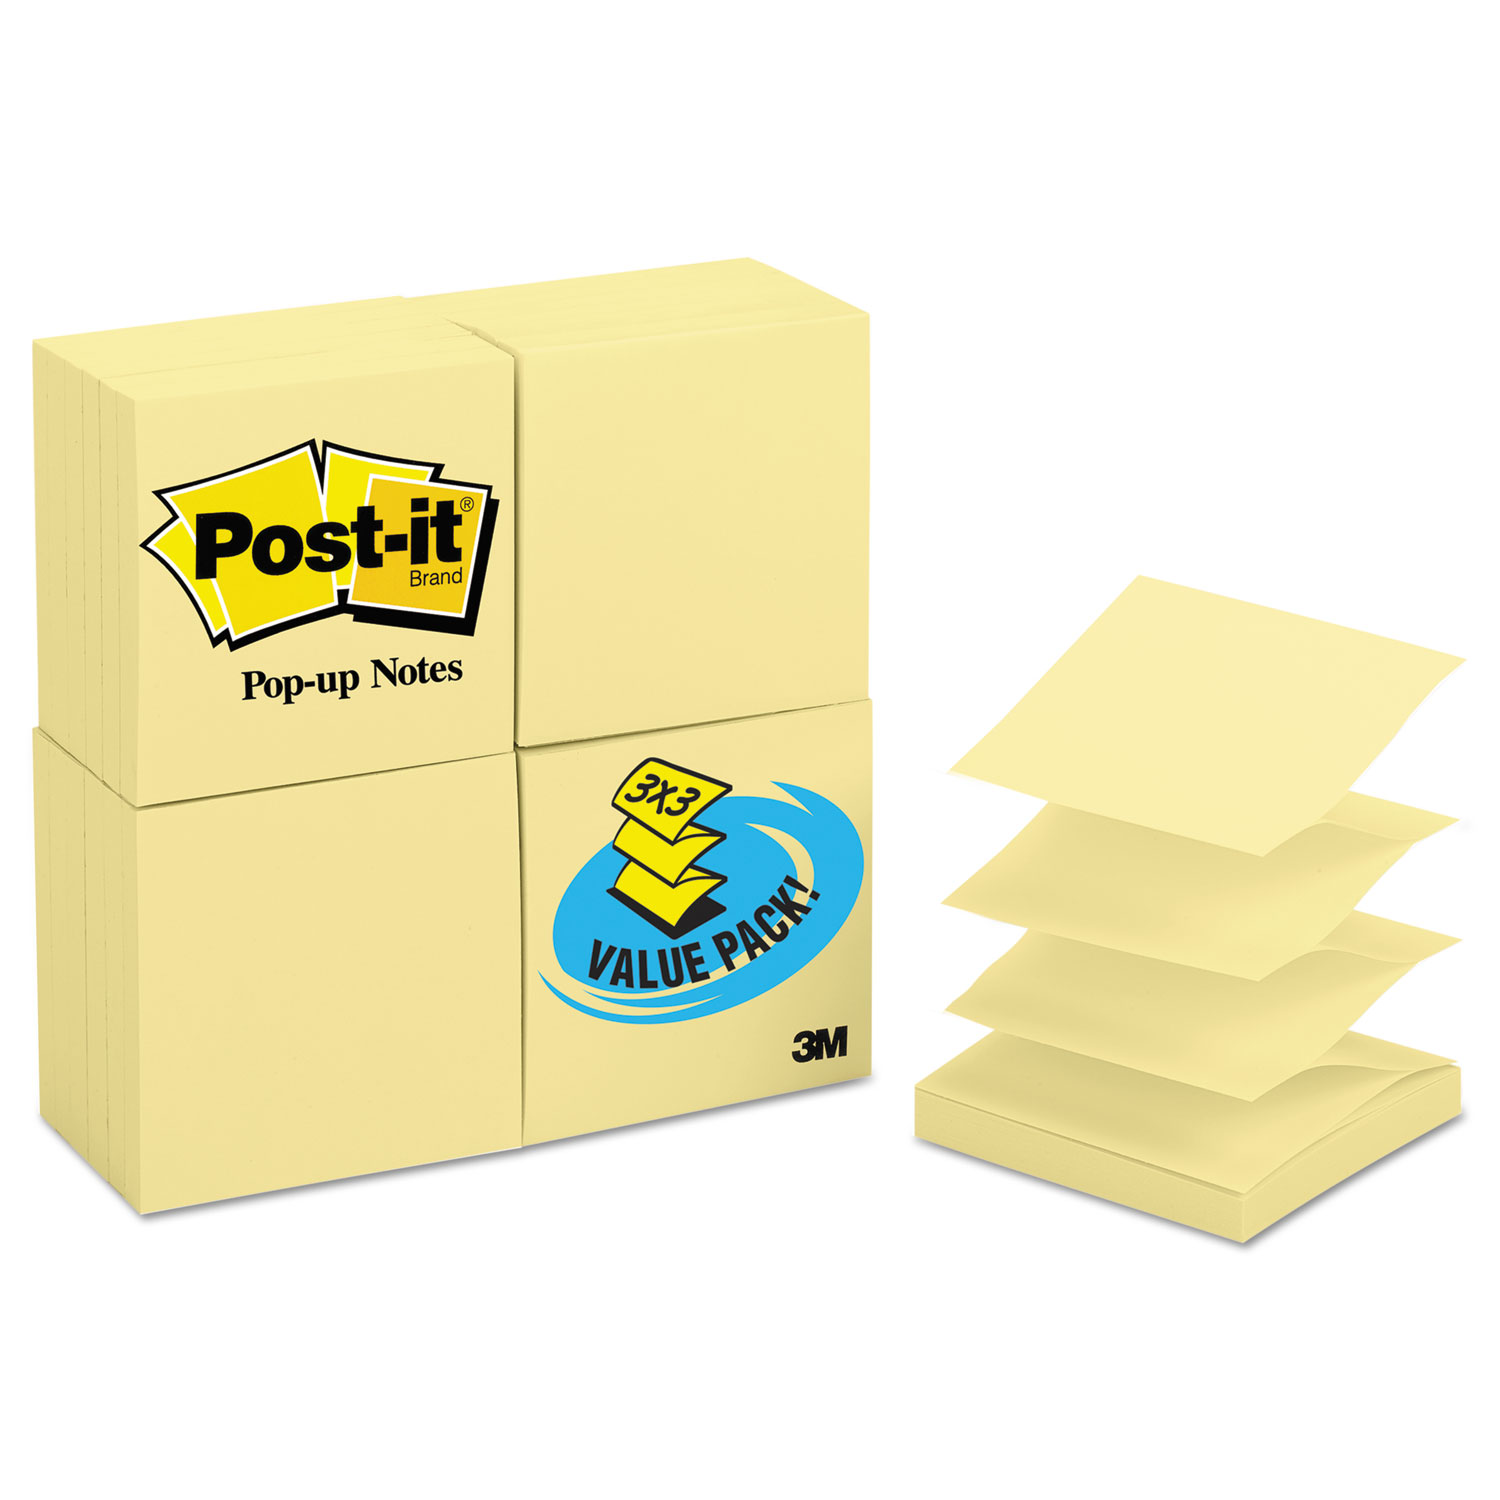  Post-it Pop-up Notes R330-24VAD Original Canary Yellow Pop-Up Refill, 3 x 3, 100-Sheet, 24/Pack (MMMR33024VAD) 